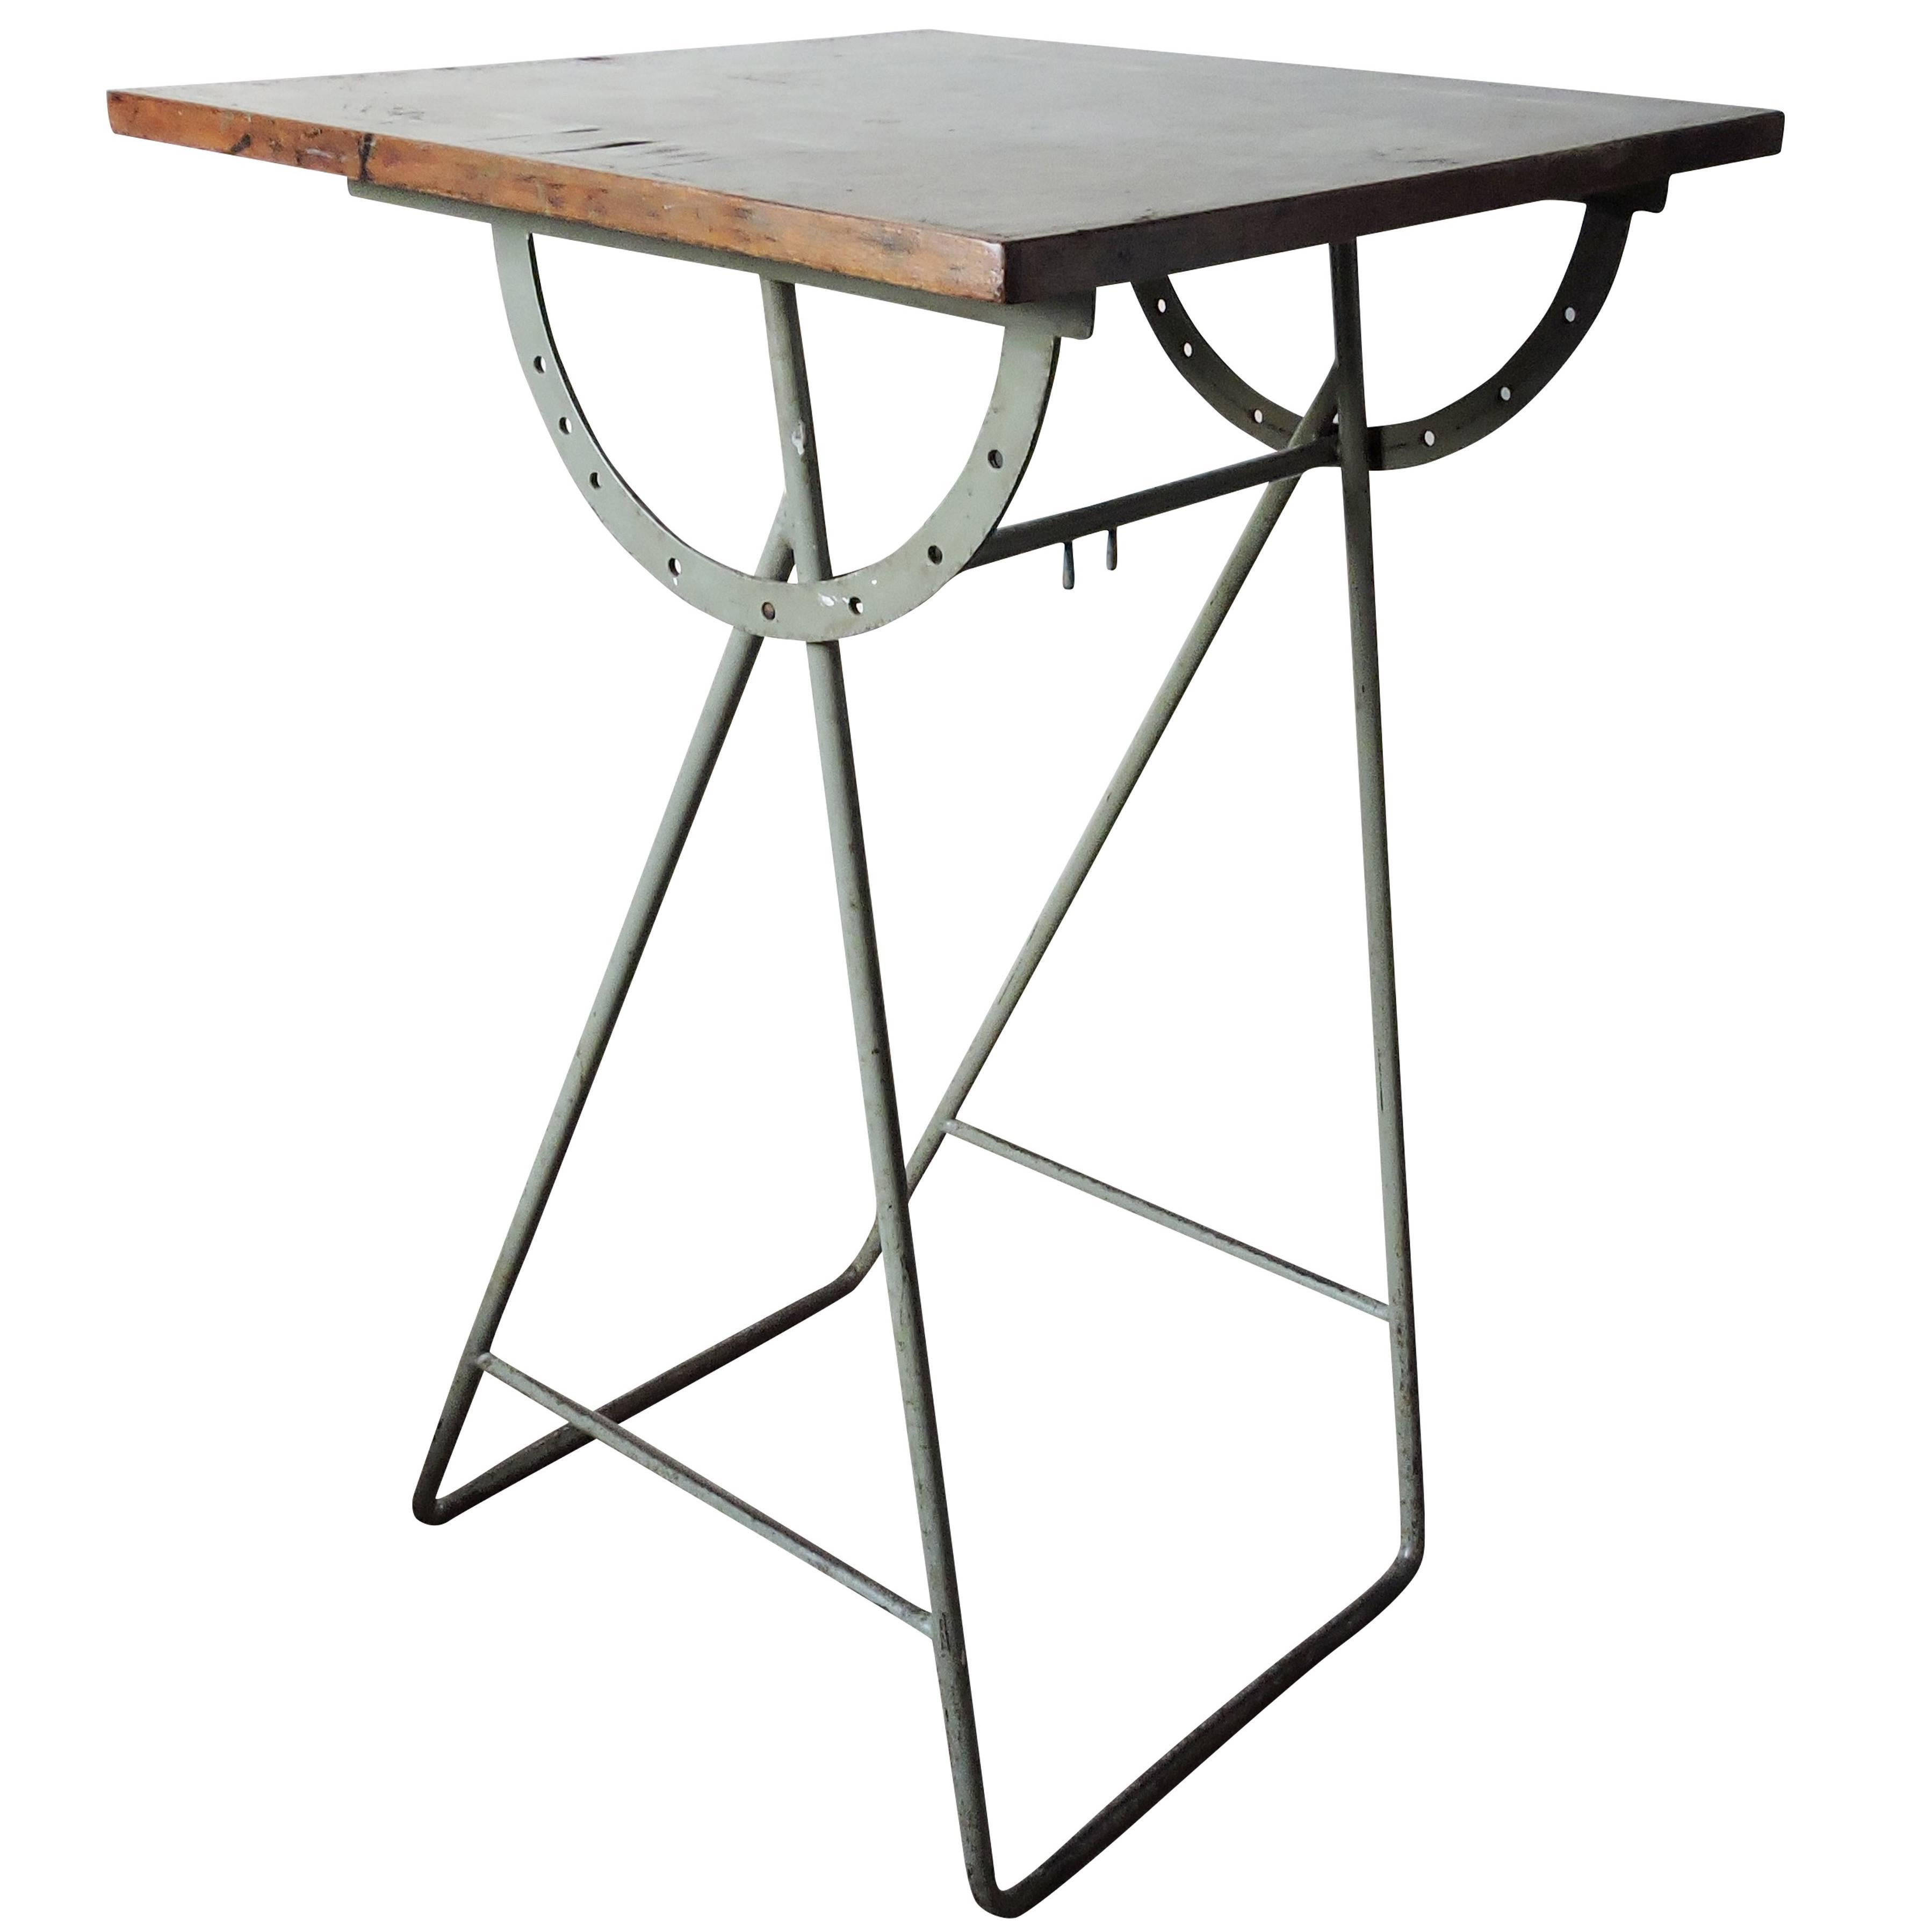 Vintage Industrial Wooden Painting Table, 1960s For Sale